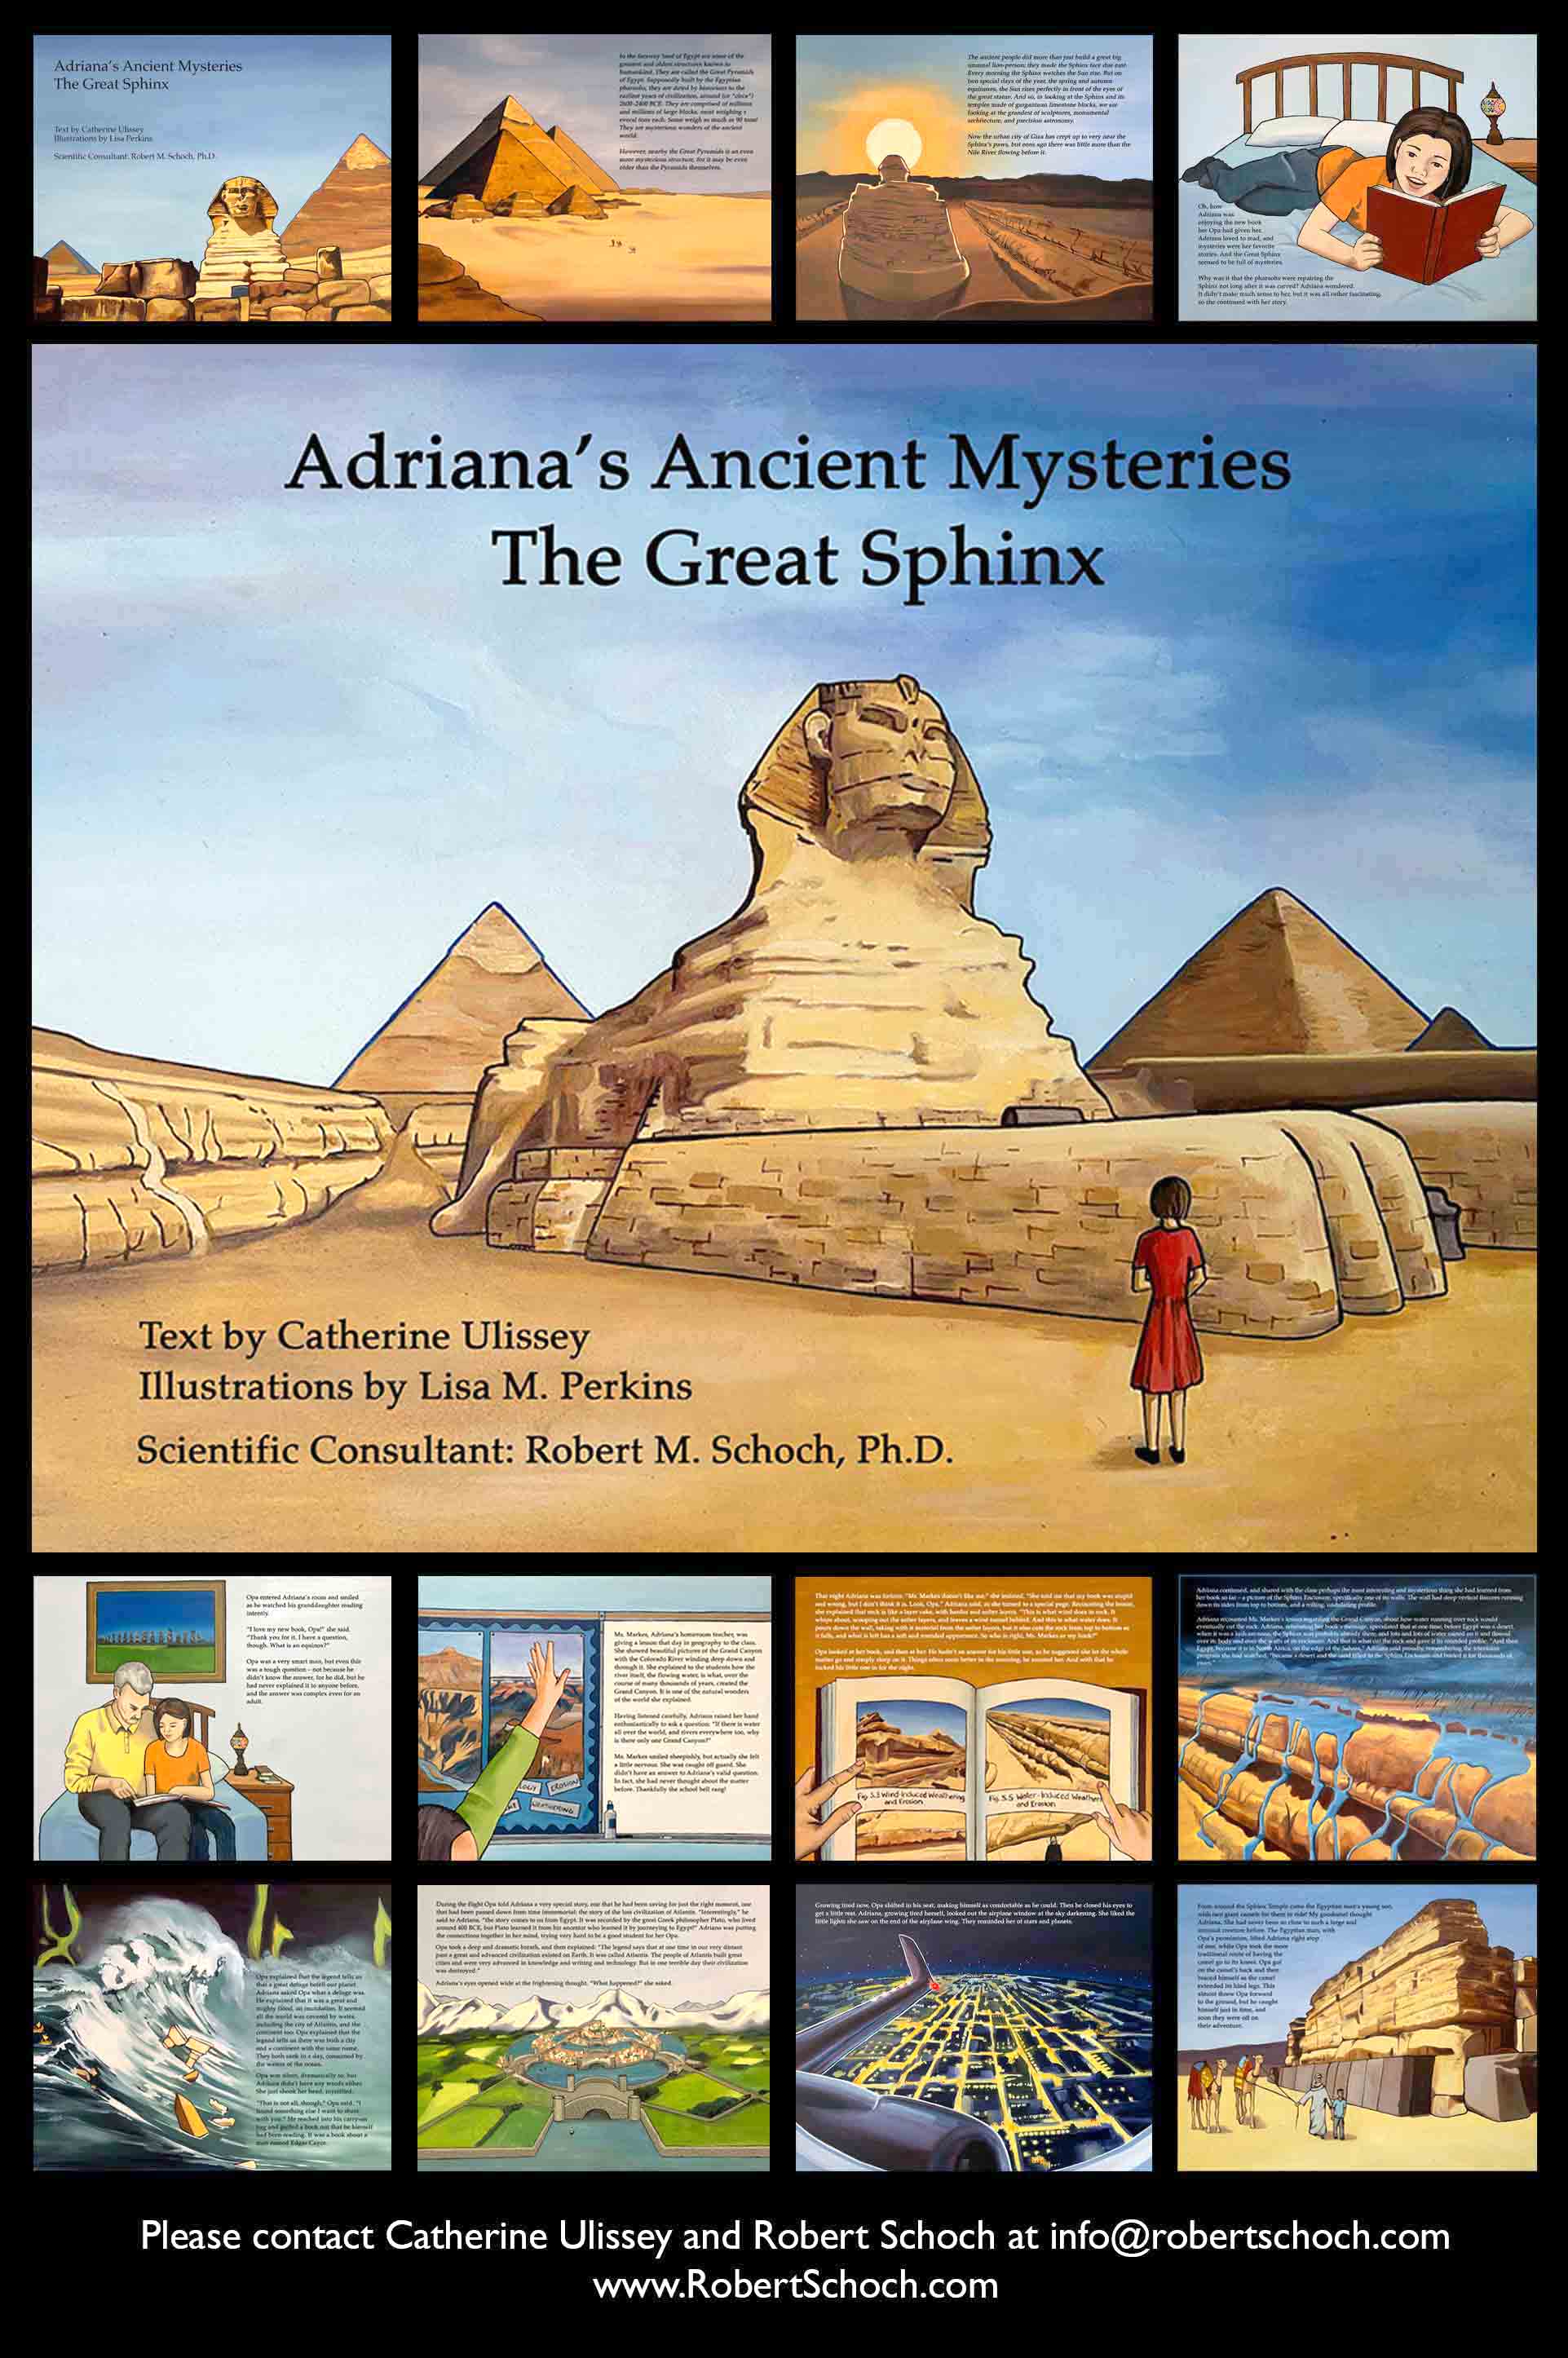 A montage of images from Adrianas Ancient Mysteries: The Great Sphinx